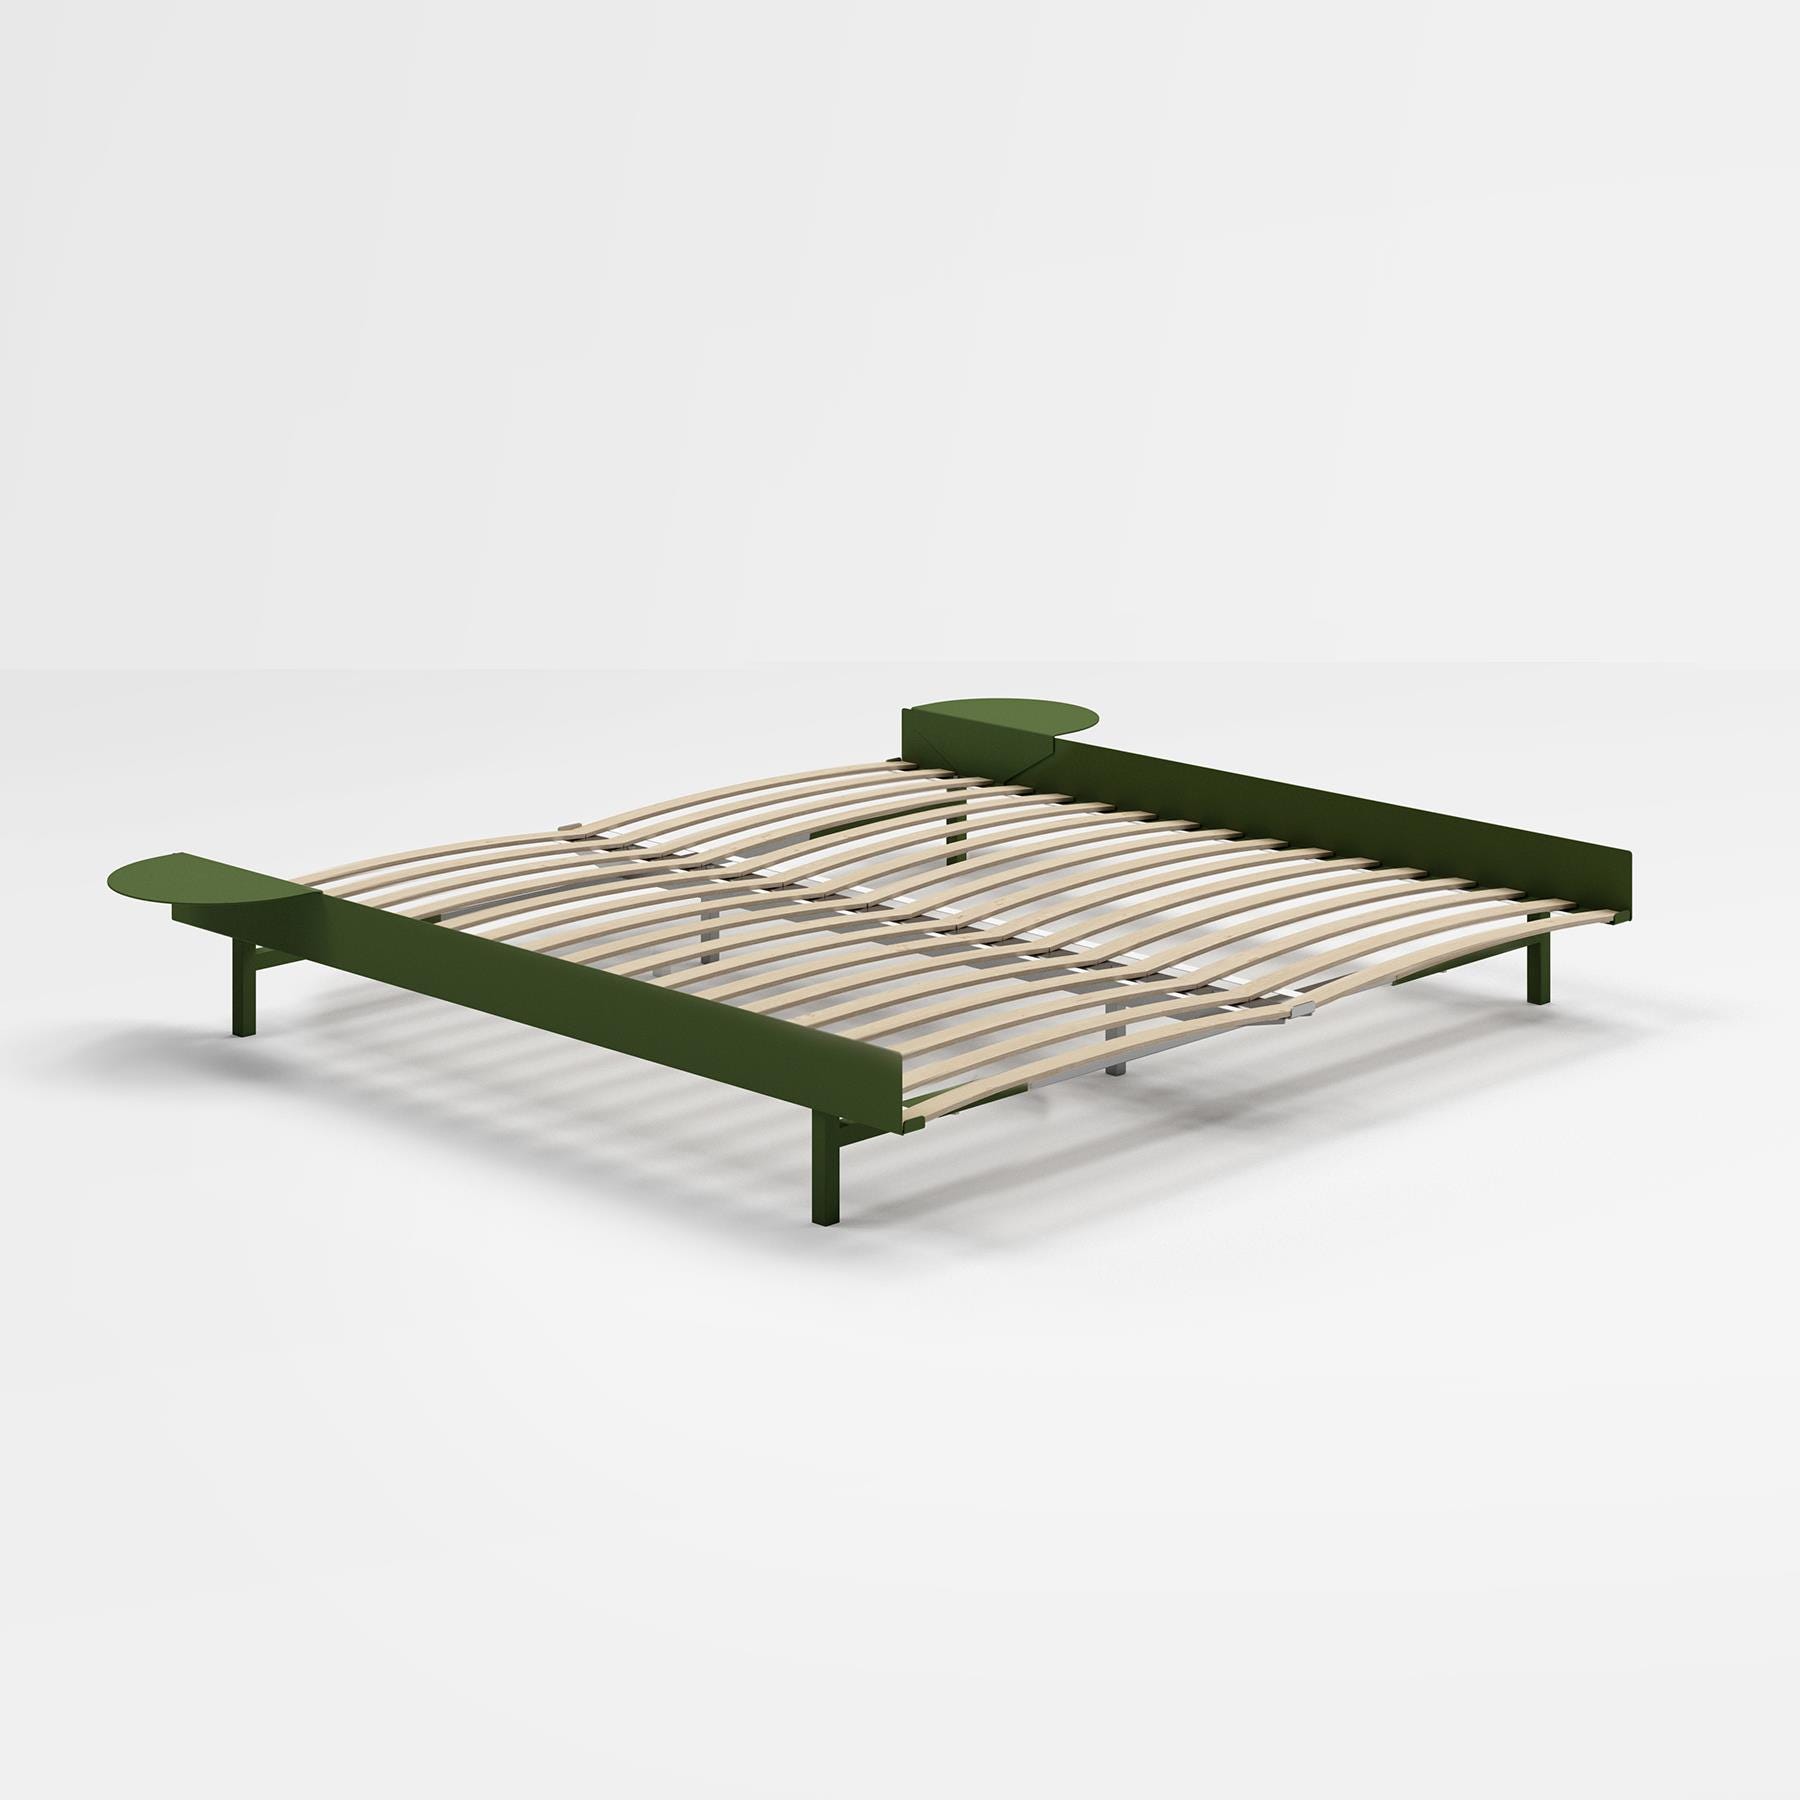 Moebe Bed Super King Pine Green 2 Side Tables Green Designer Furniture From Holloways Of Ludlow